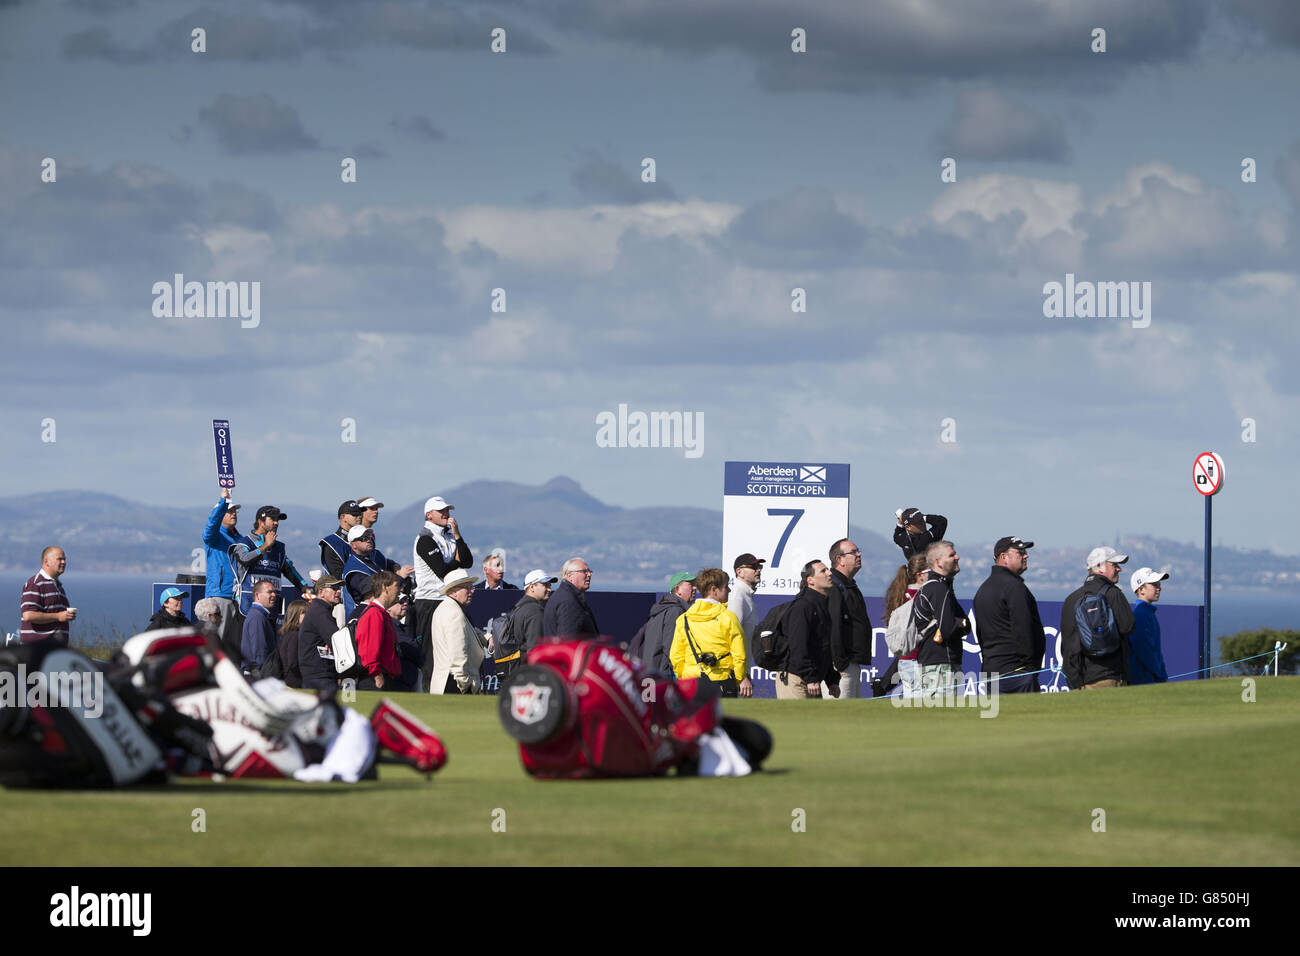 Scotland's Paul Lawrie tees off at the 7th hole with the Kingdom of Fife in the background during day one of the Scottish Open at Gullane Golf Club, East Lothian. PRESS ASSOCIATION Photo. Picture date: Thursday July 9, 2015. See PA story GOLF Gullane. Photo credit should read: Kenny Smith/PA Wire. RESTRICTIONS: . No commercial use. No false commercial association. No video emulation. No manipulation of images. Stock Photo